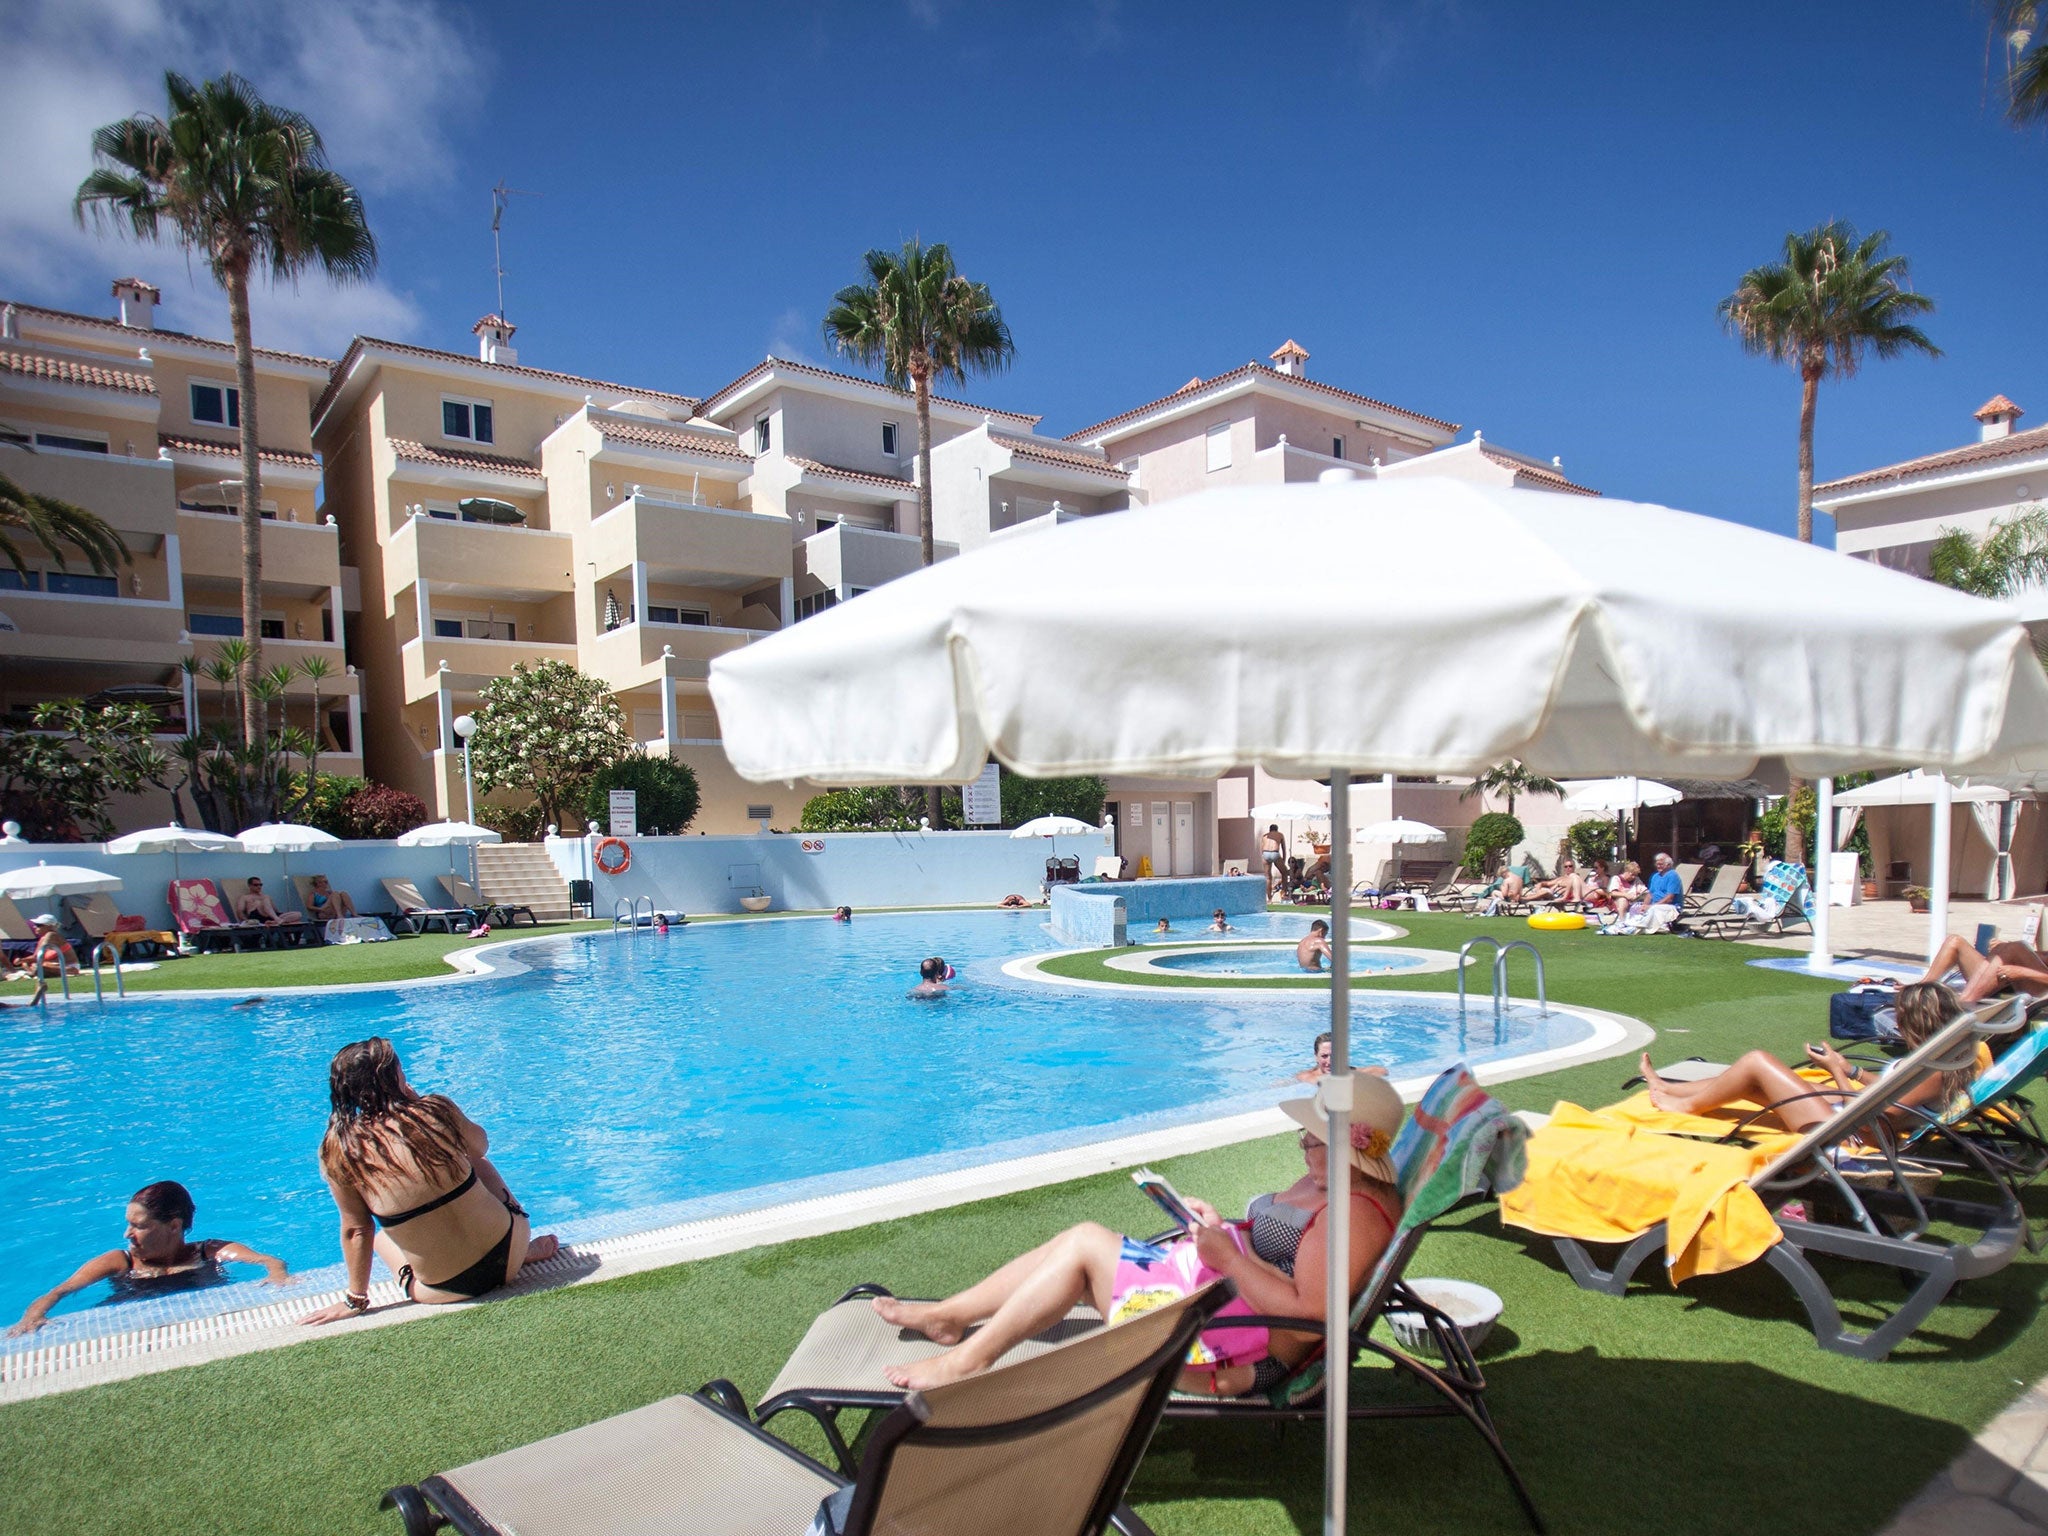 Tenerife in the Canary Islands is popular destination among British travellers